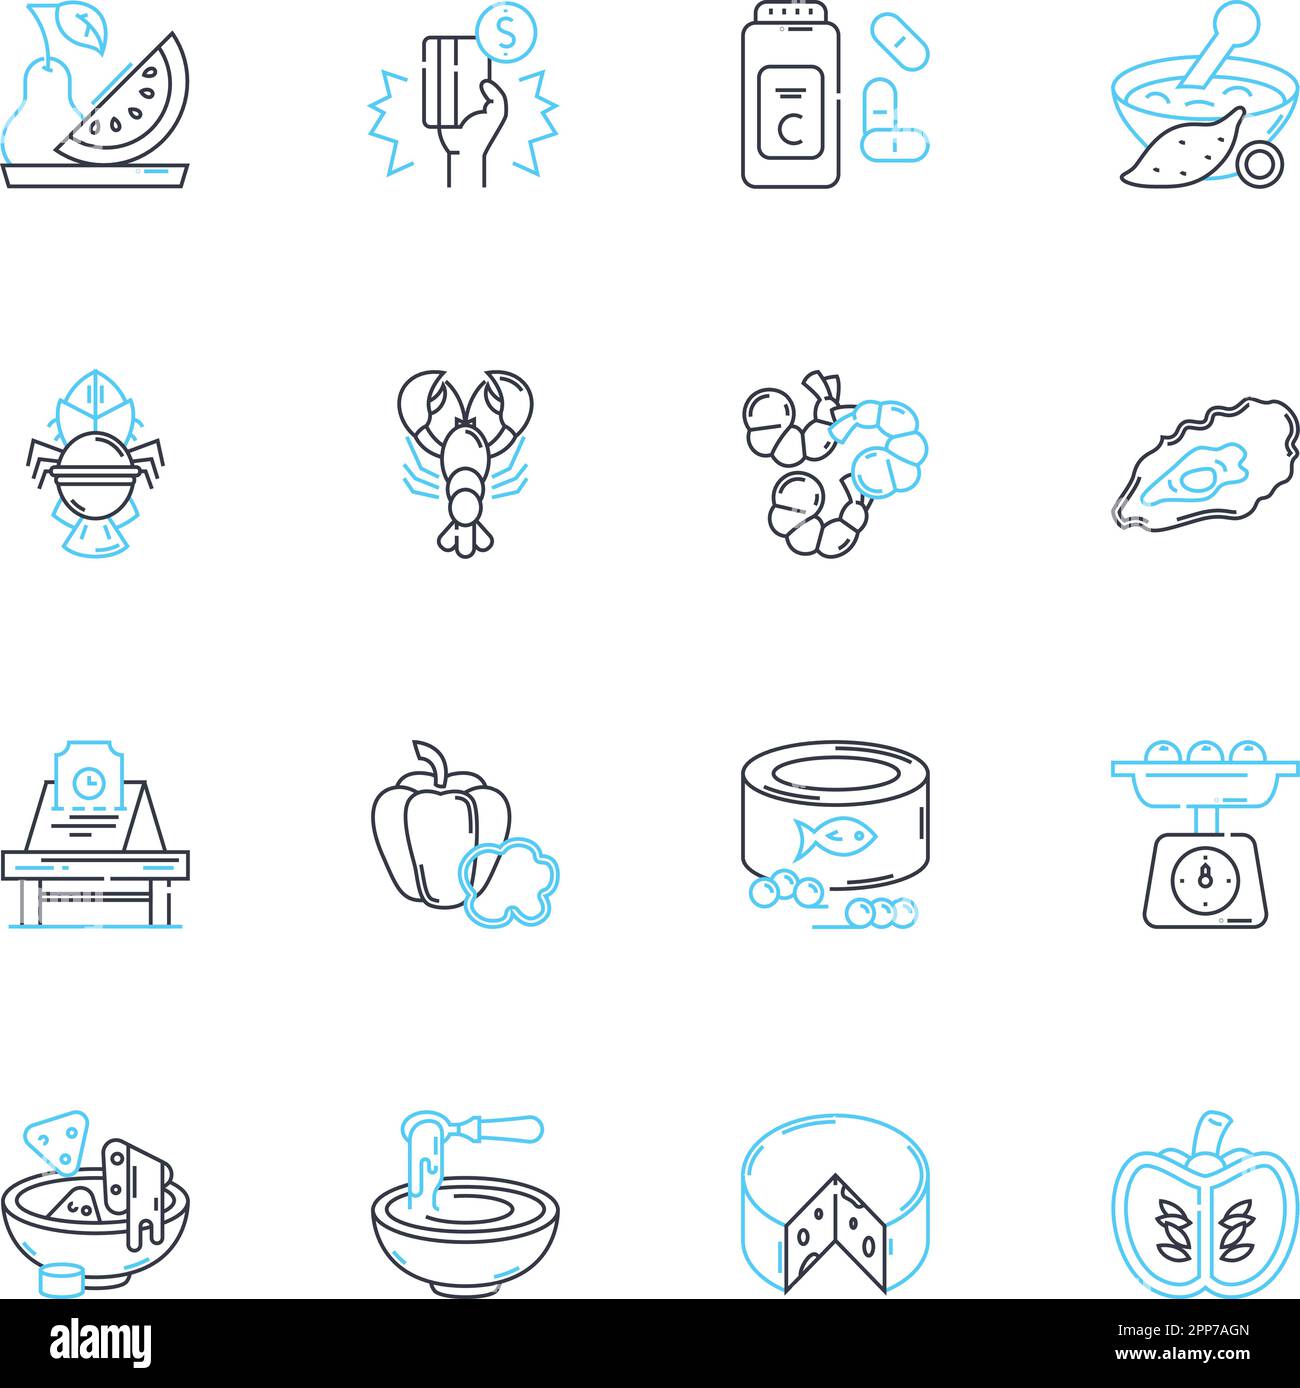 Clam house linear icons set. Shellfish, Chowder, Mussels, Steamers, Lobster, Oysters, Seafood line vector and concept signs. Butter,Shrimp,Octopus Stock Vector